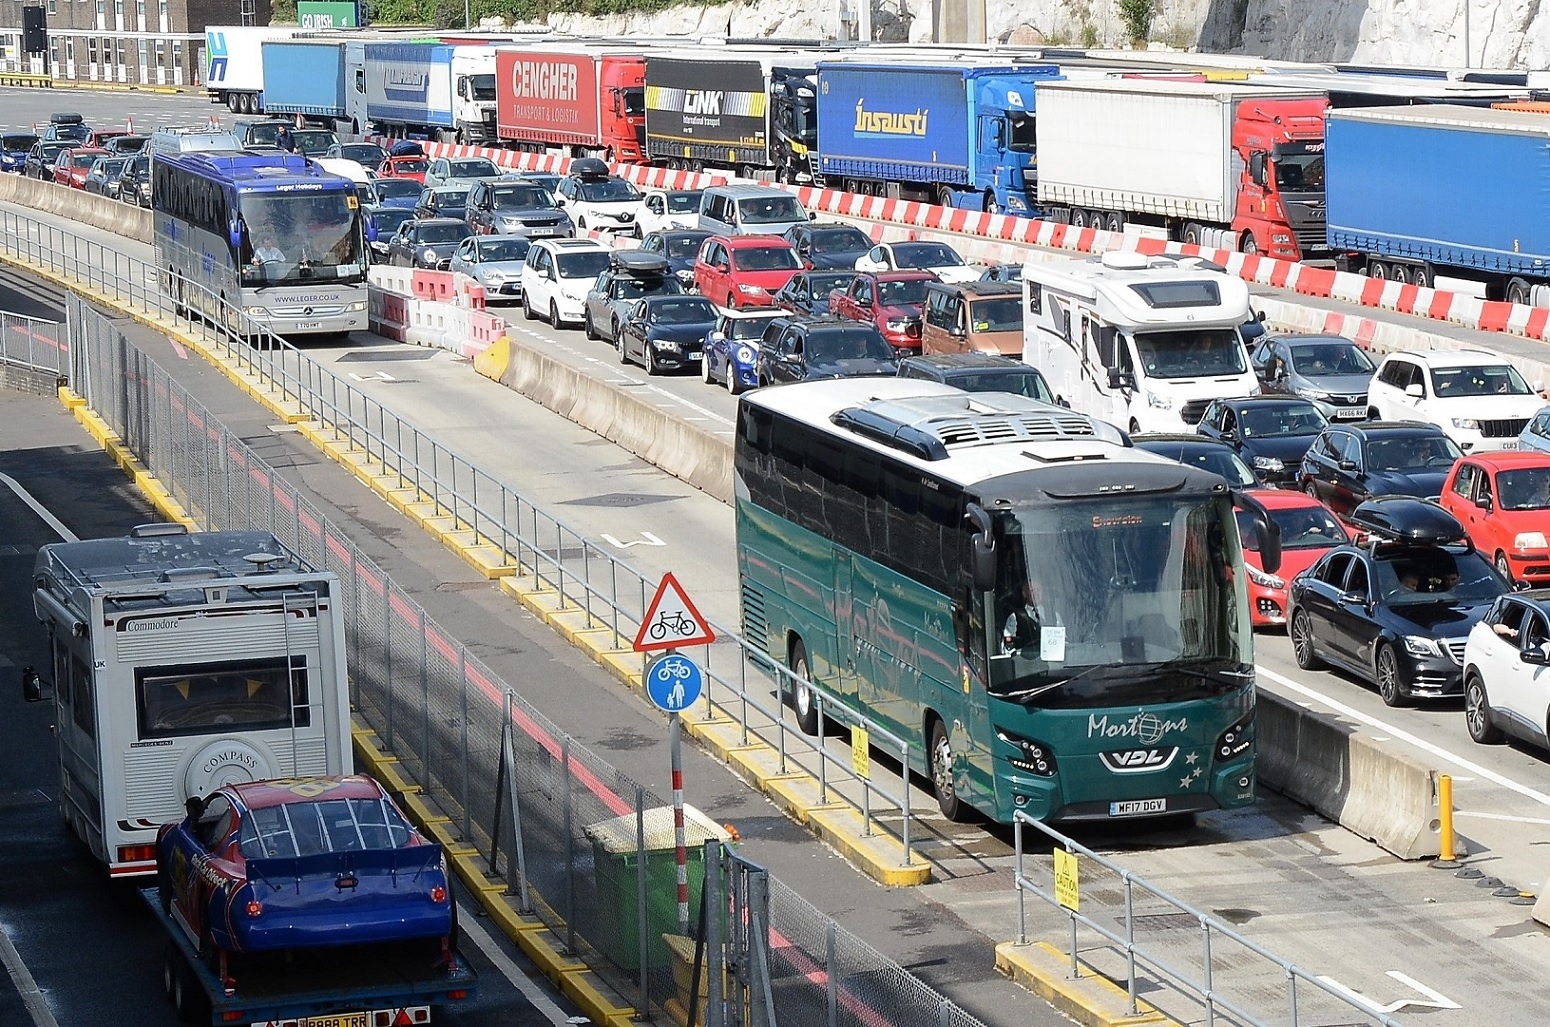 EU Entry Exit System fears for coach operators at Dover